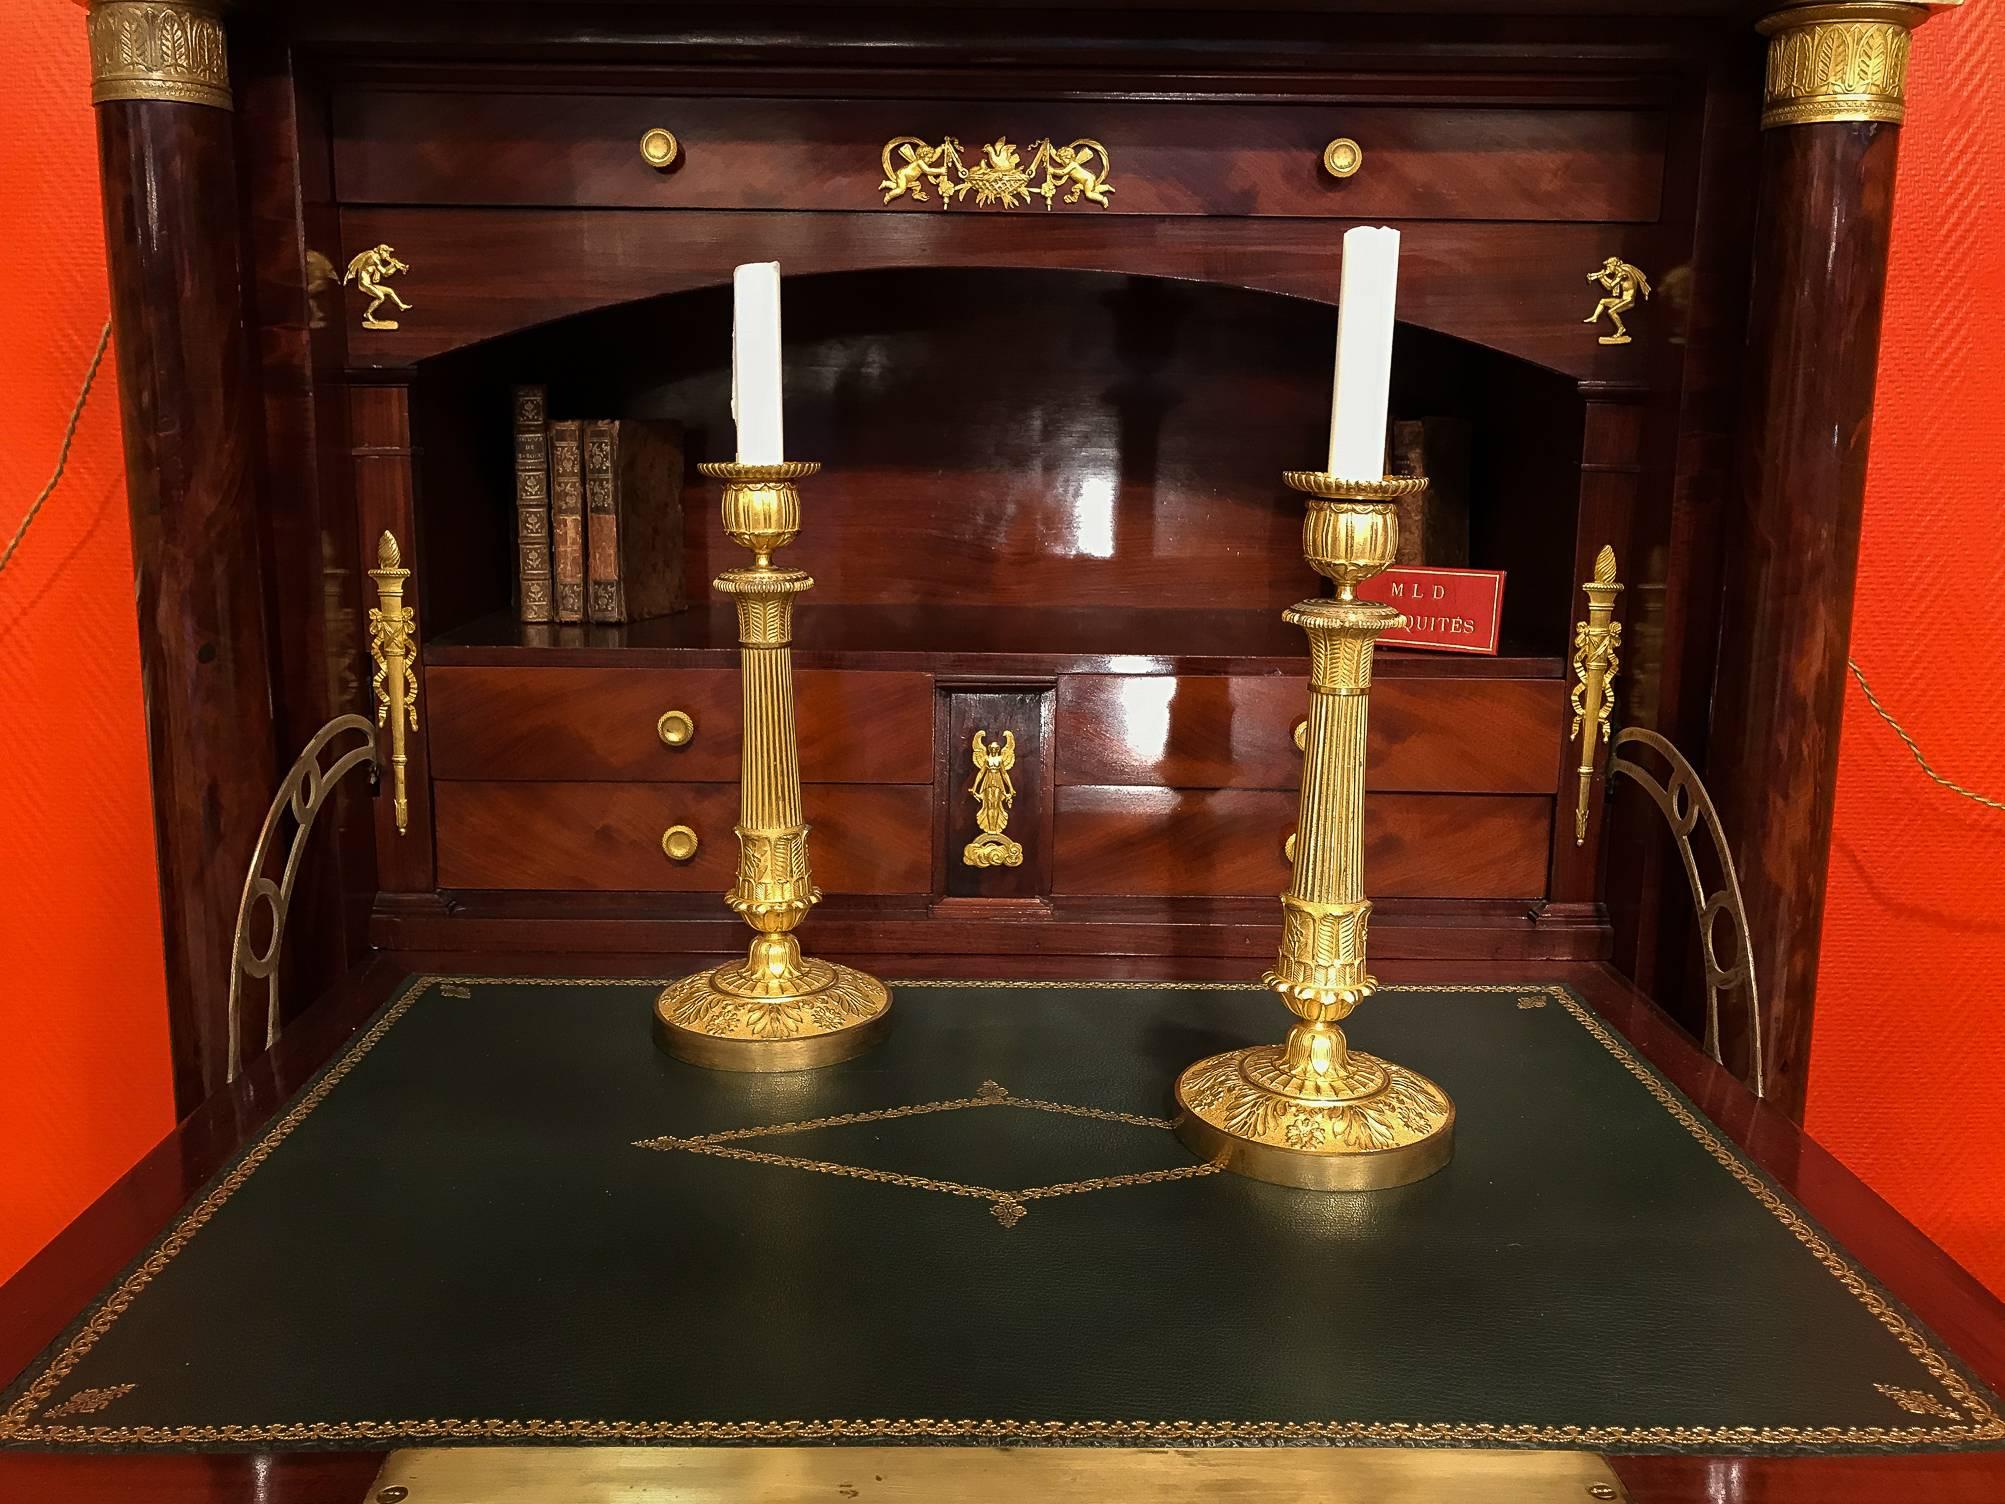 An exciting and gorgeous pair of French Empire period, original gilt-bronze candlesticks, finely chiseled of palmettes and flowers.

Beautiful French work early 19th century, Empire period, circa 1805-1810.

Dimensions: 11.41 in H, 4.72 in D.
